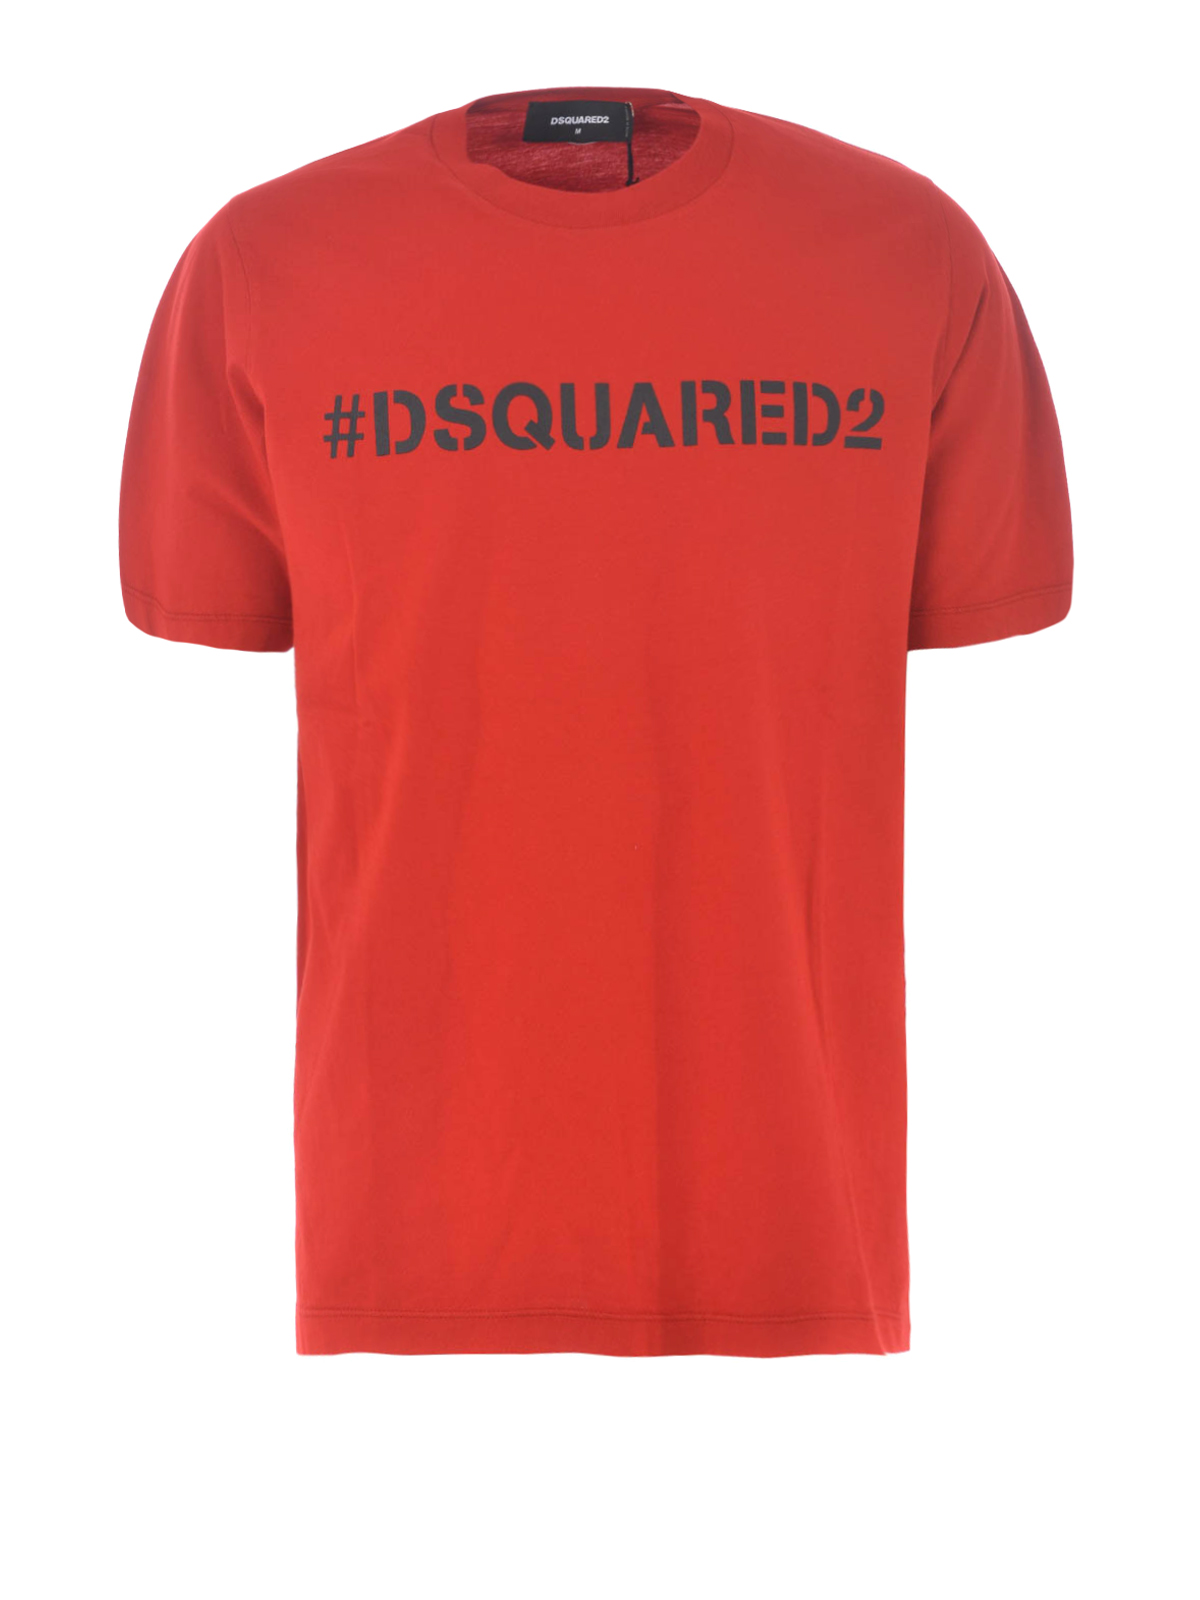 DSQUARED2 print red T-shirt 